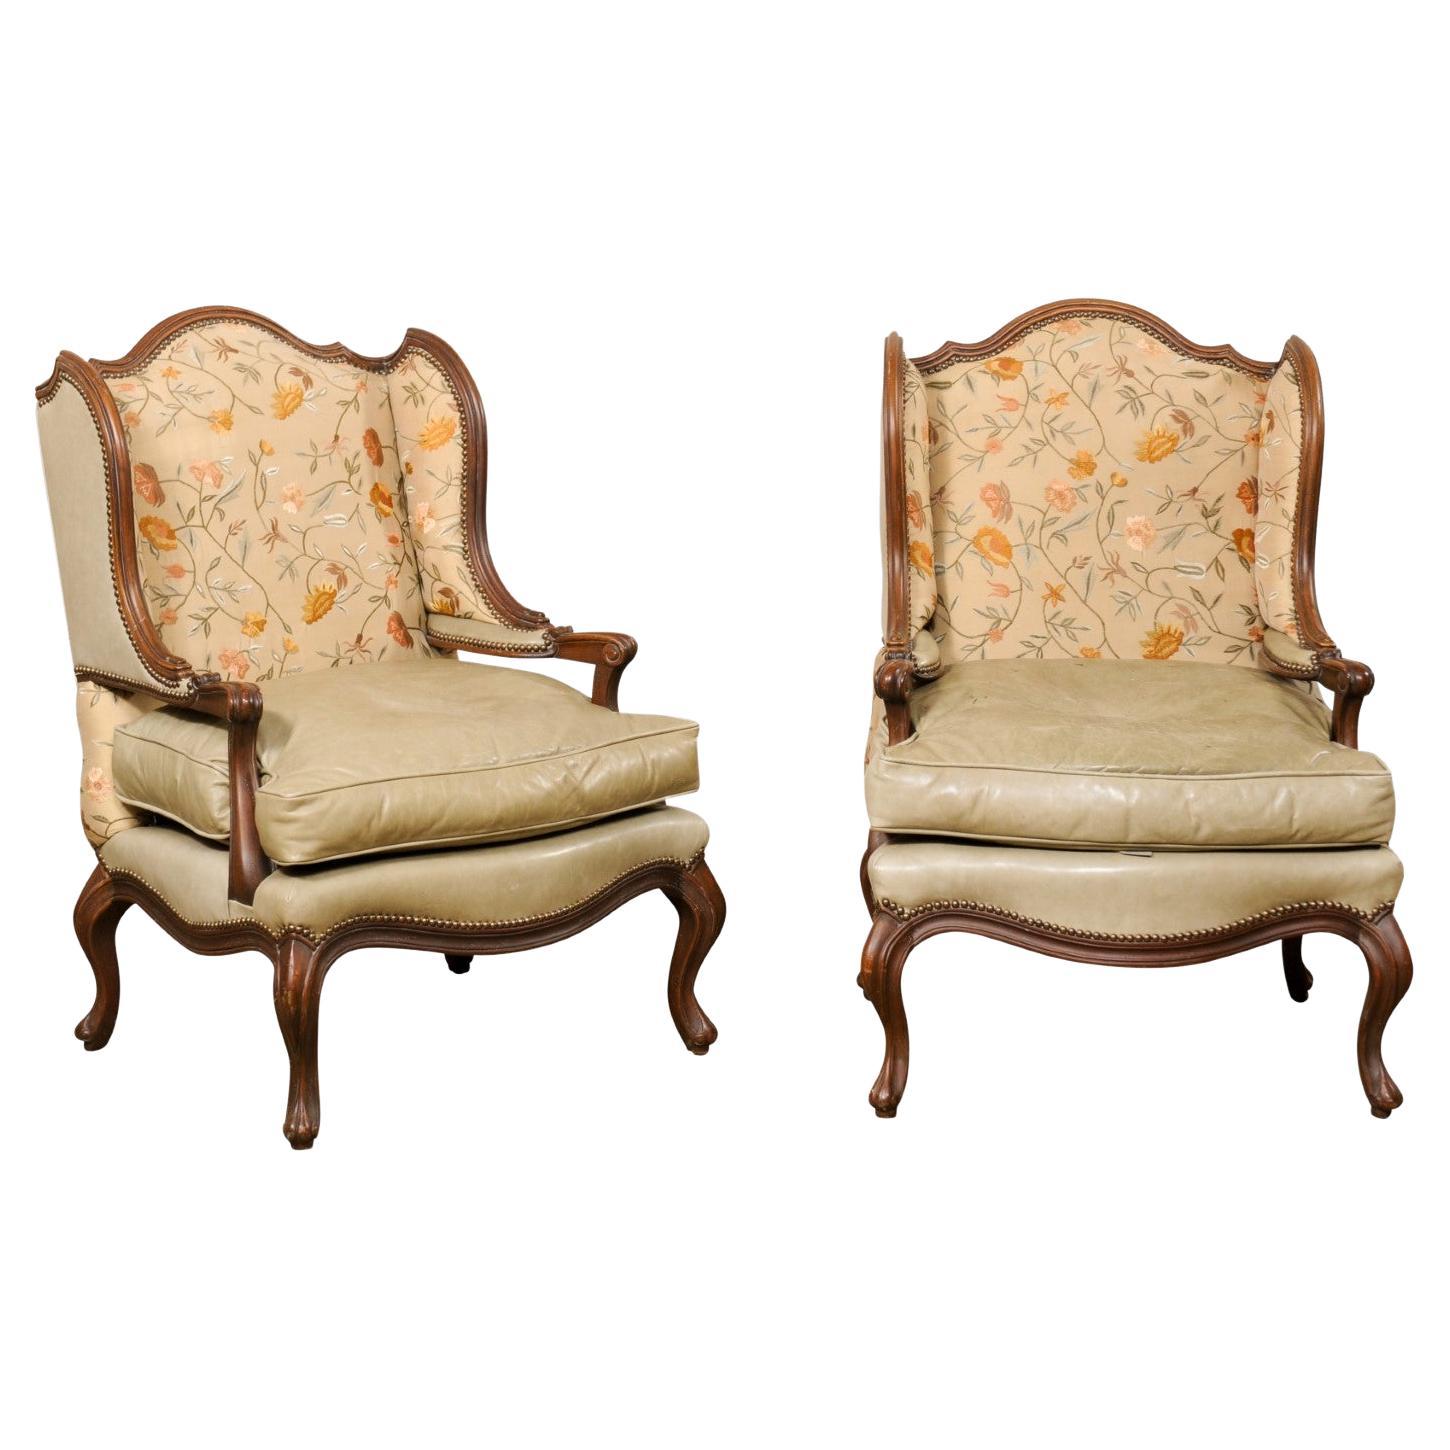 Pair Nicely-Sized Carved Wood & Upholstered Wing-Back Chairs, Mid 20th C